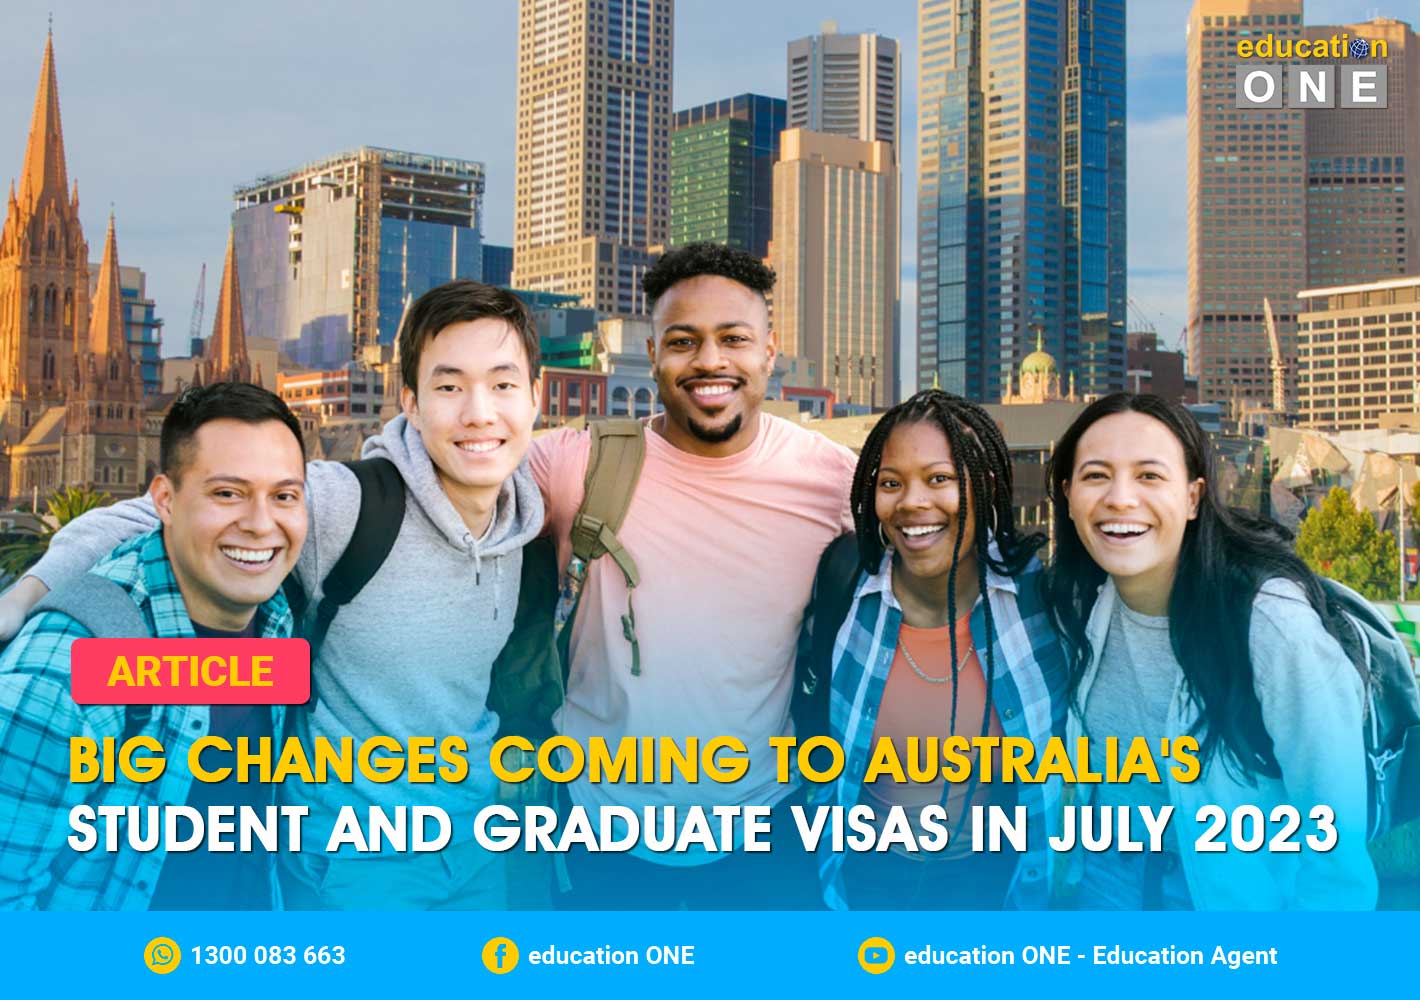 student visa working hours and temporary graduate visa duraction increased in july 2023